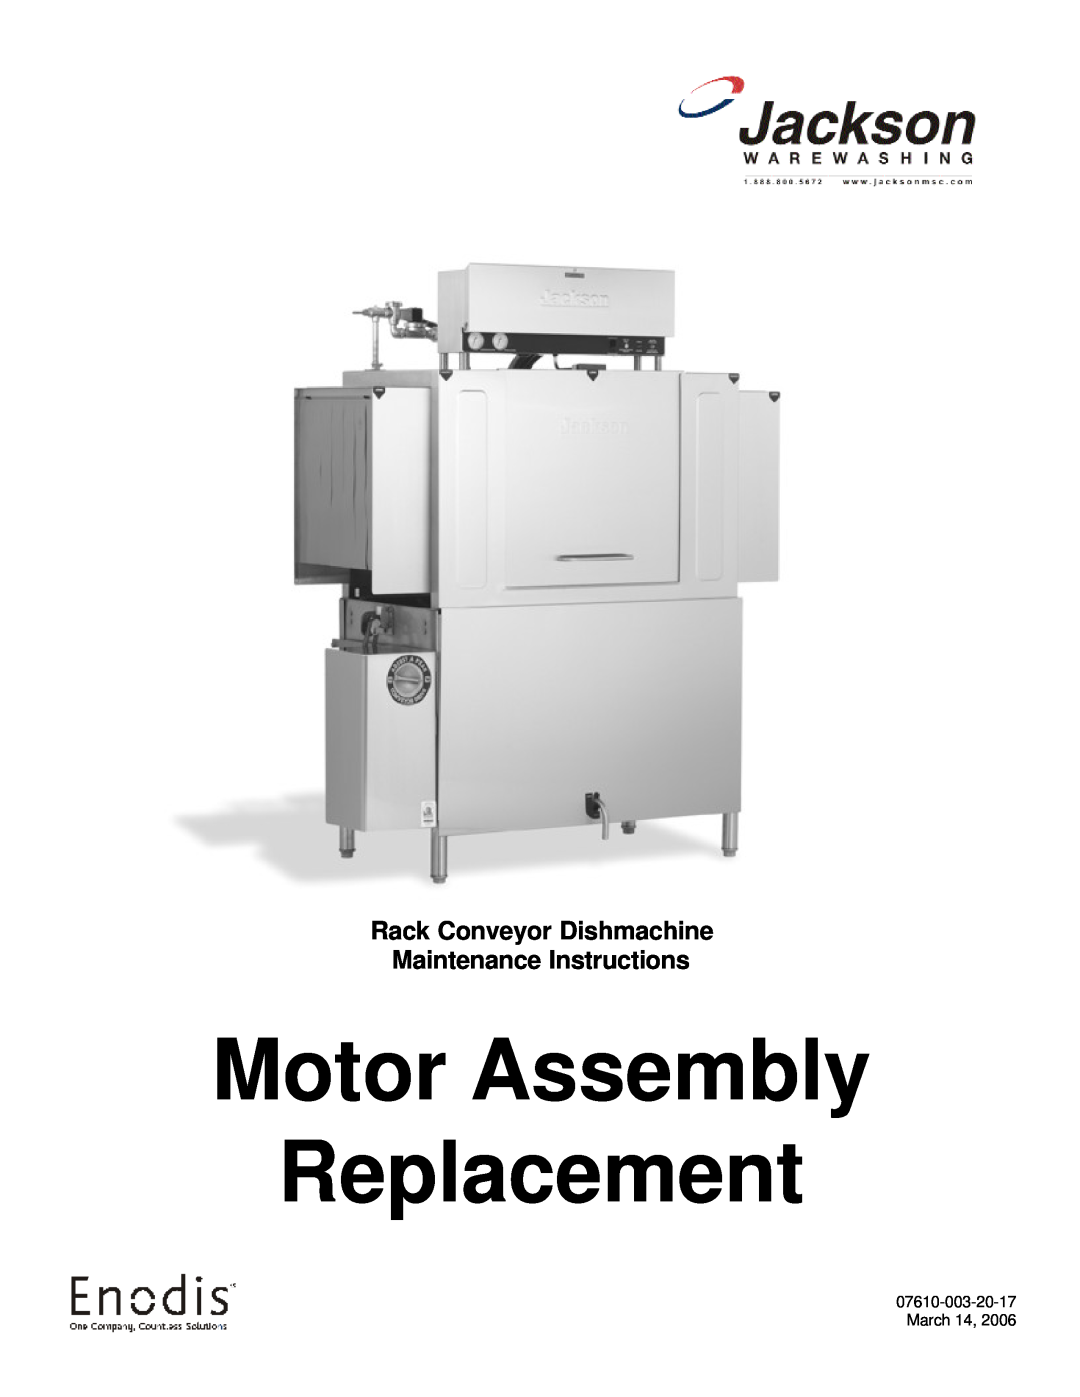 Jackson Rack Conveyor Dishmachine manual Motor Assembly Replacement, Maintenance Instructions, 07610-003-20-17March 